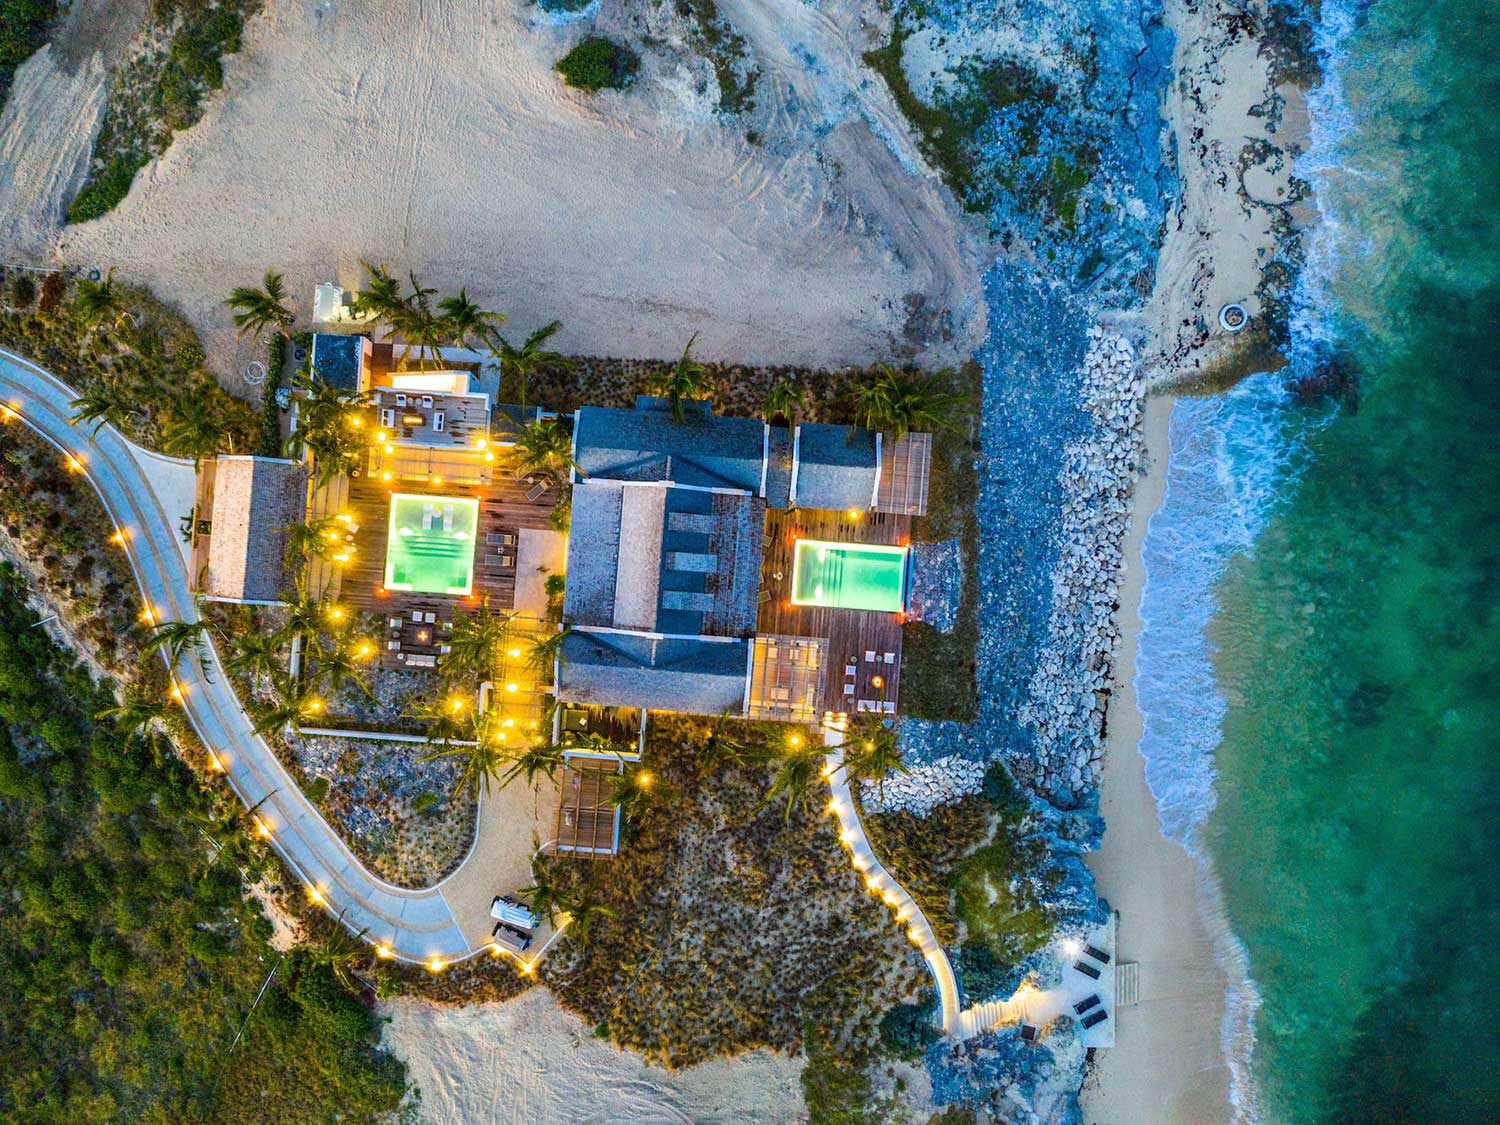 An aerial view of the Dream Pavilion accommodations at the Ambergris Cay private island resort in Turks and Caicos.